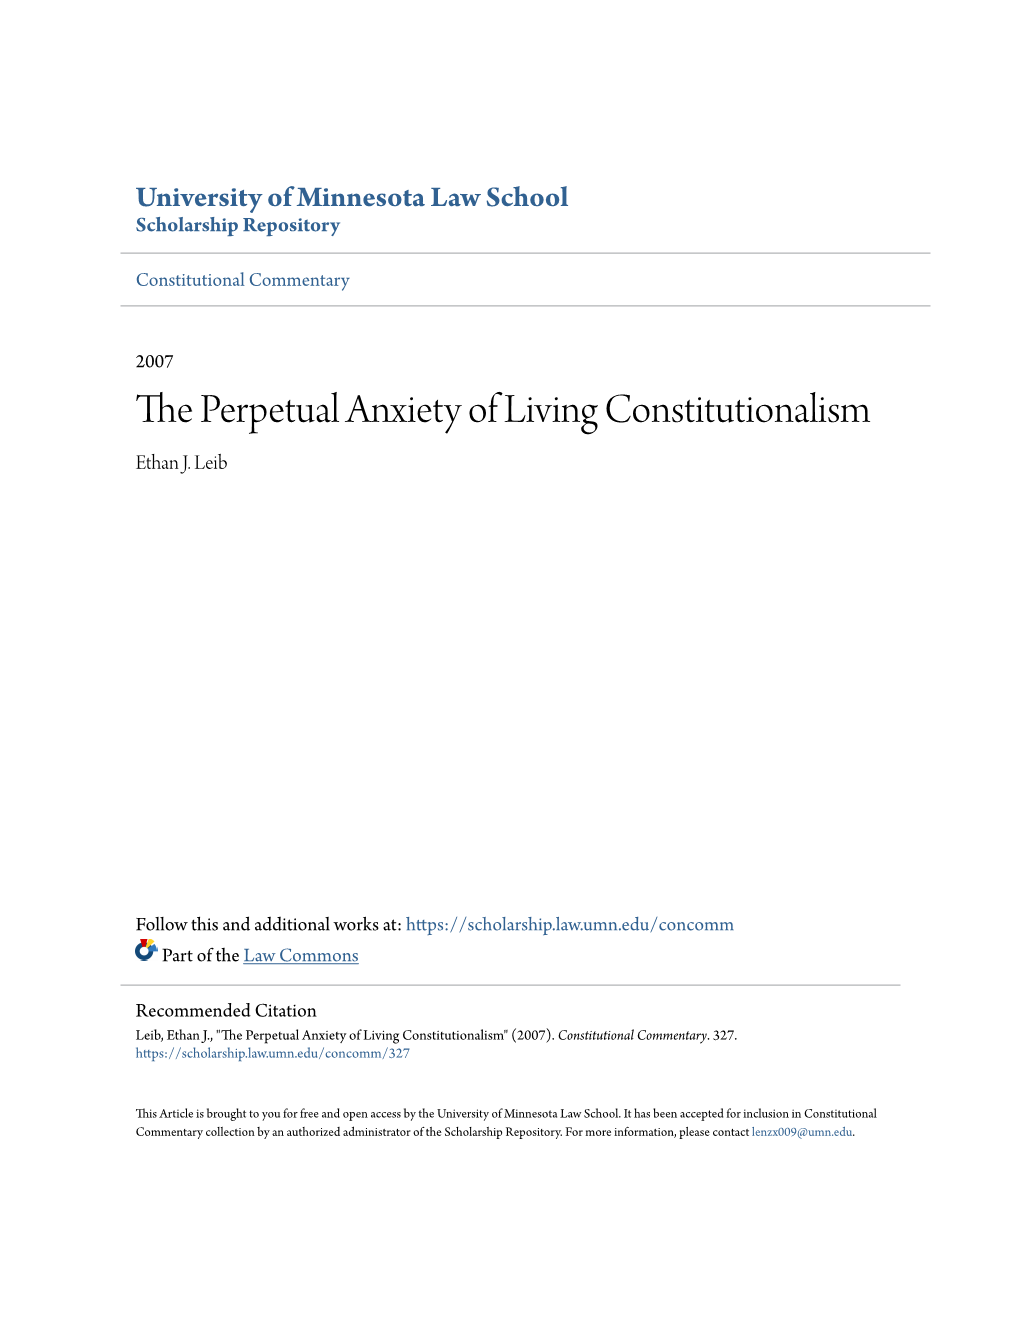 The Perpetual Anxiety of Living Constitutionalism